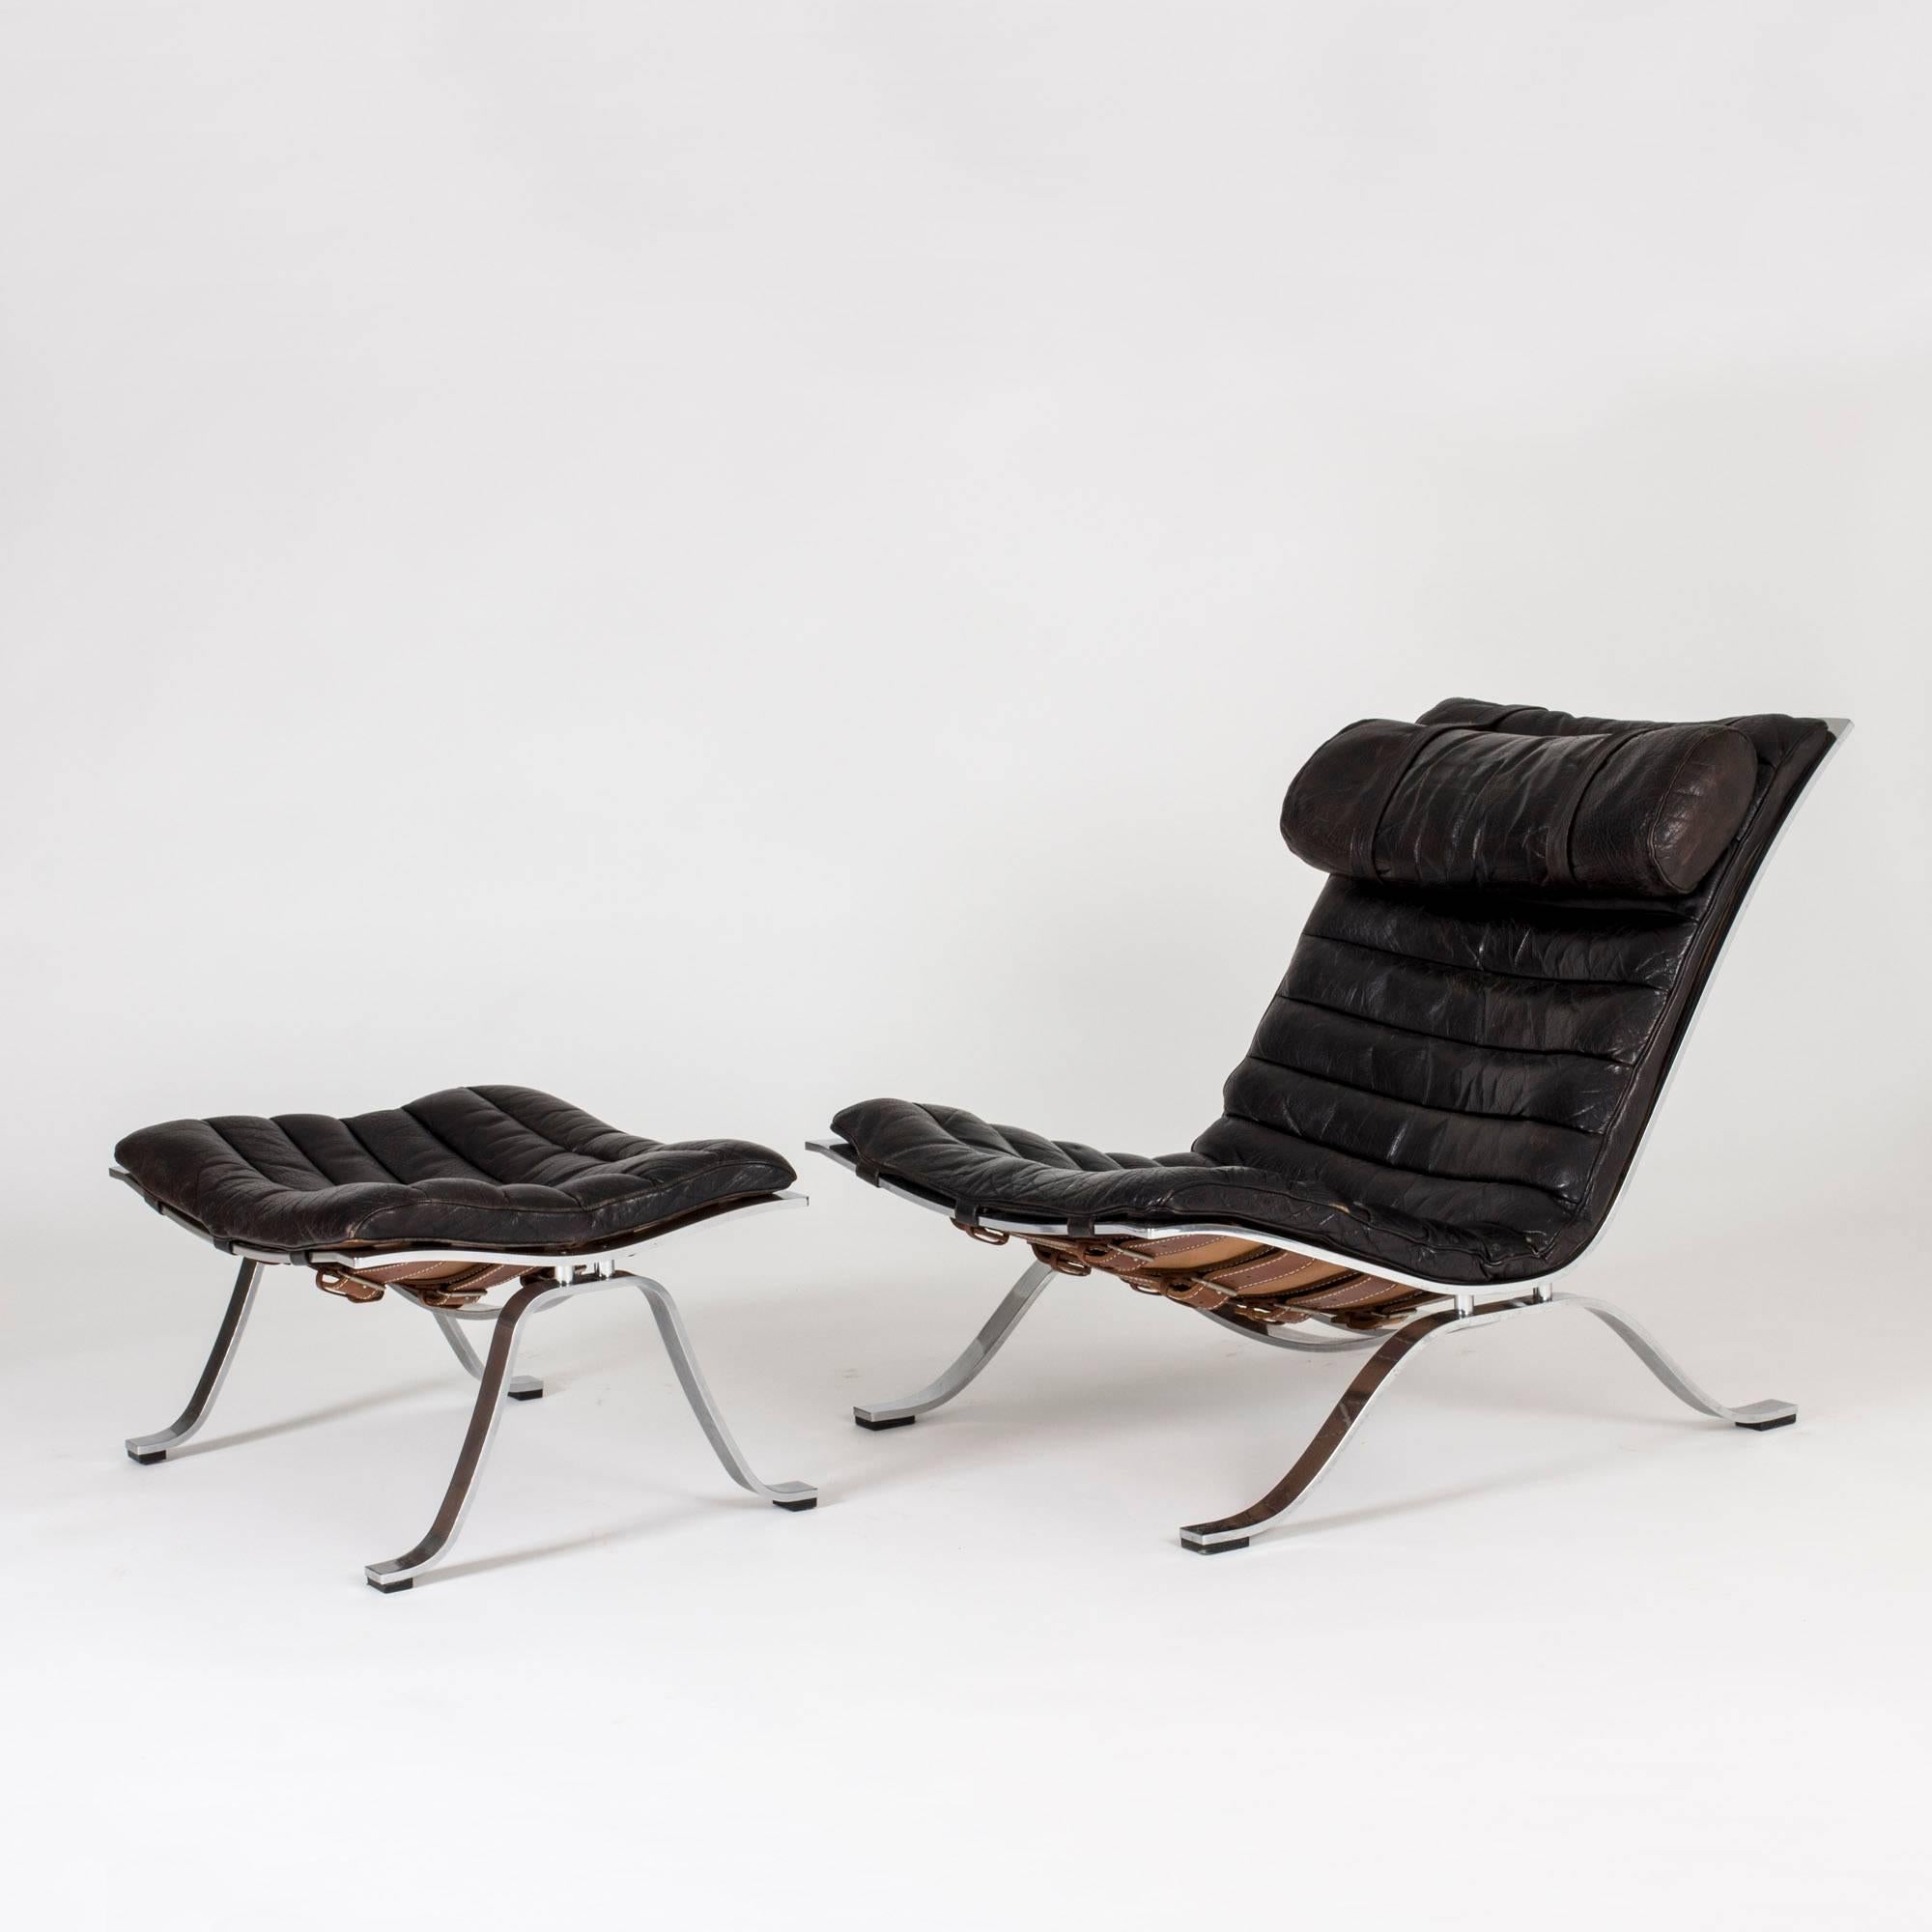 Incredibly cool and oh so comfortable “Ari” lounge chair with stool by Arne Norell, made from steel and leather. Beautiful black leather with nice patina.

Dimensions of the stool: H 34, W 65, D 50 cm.